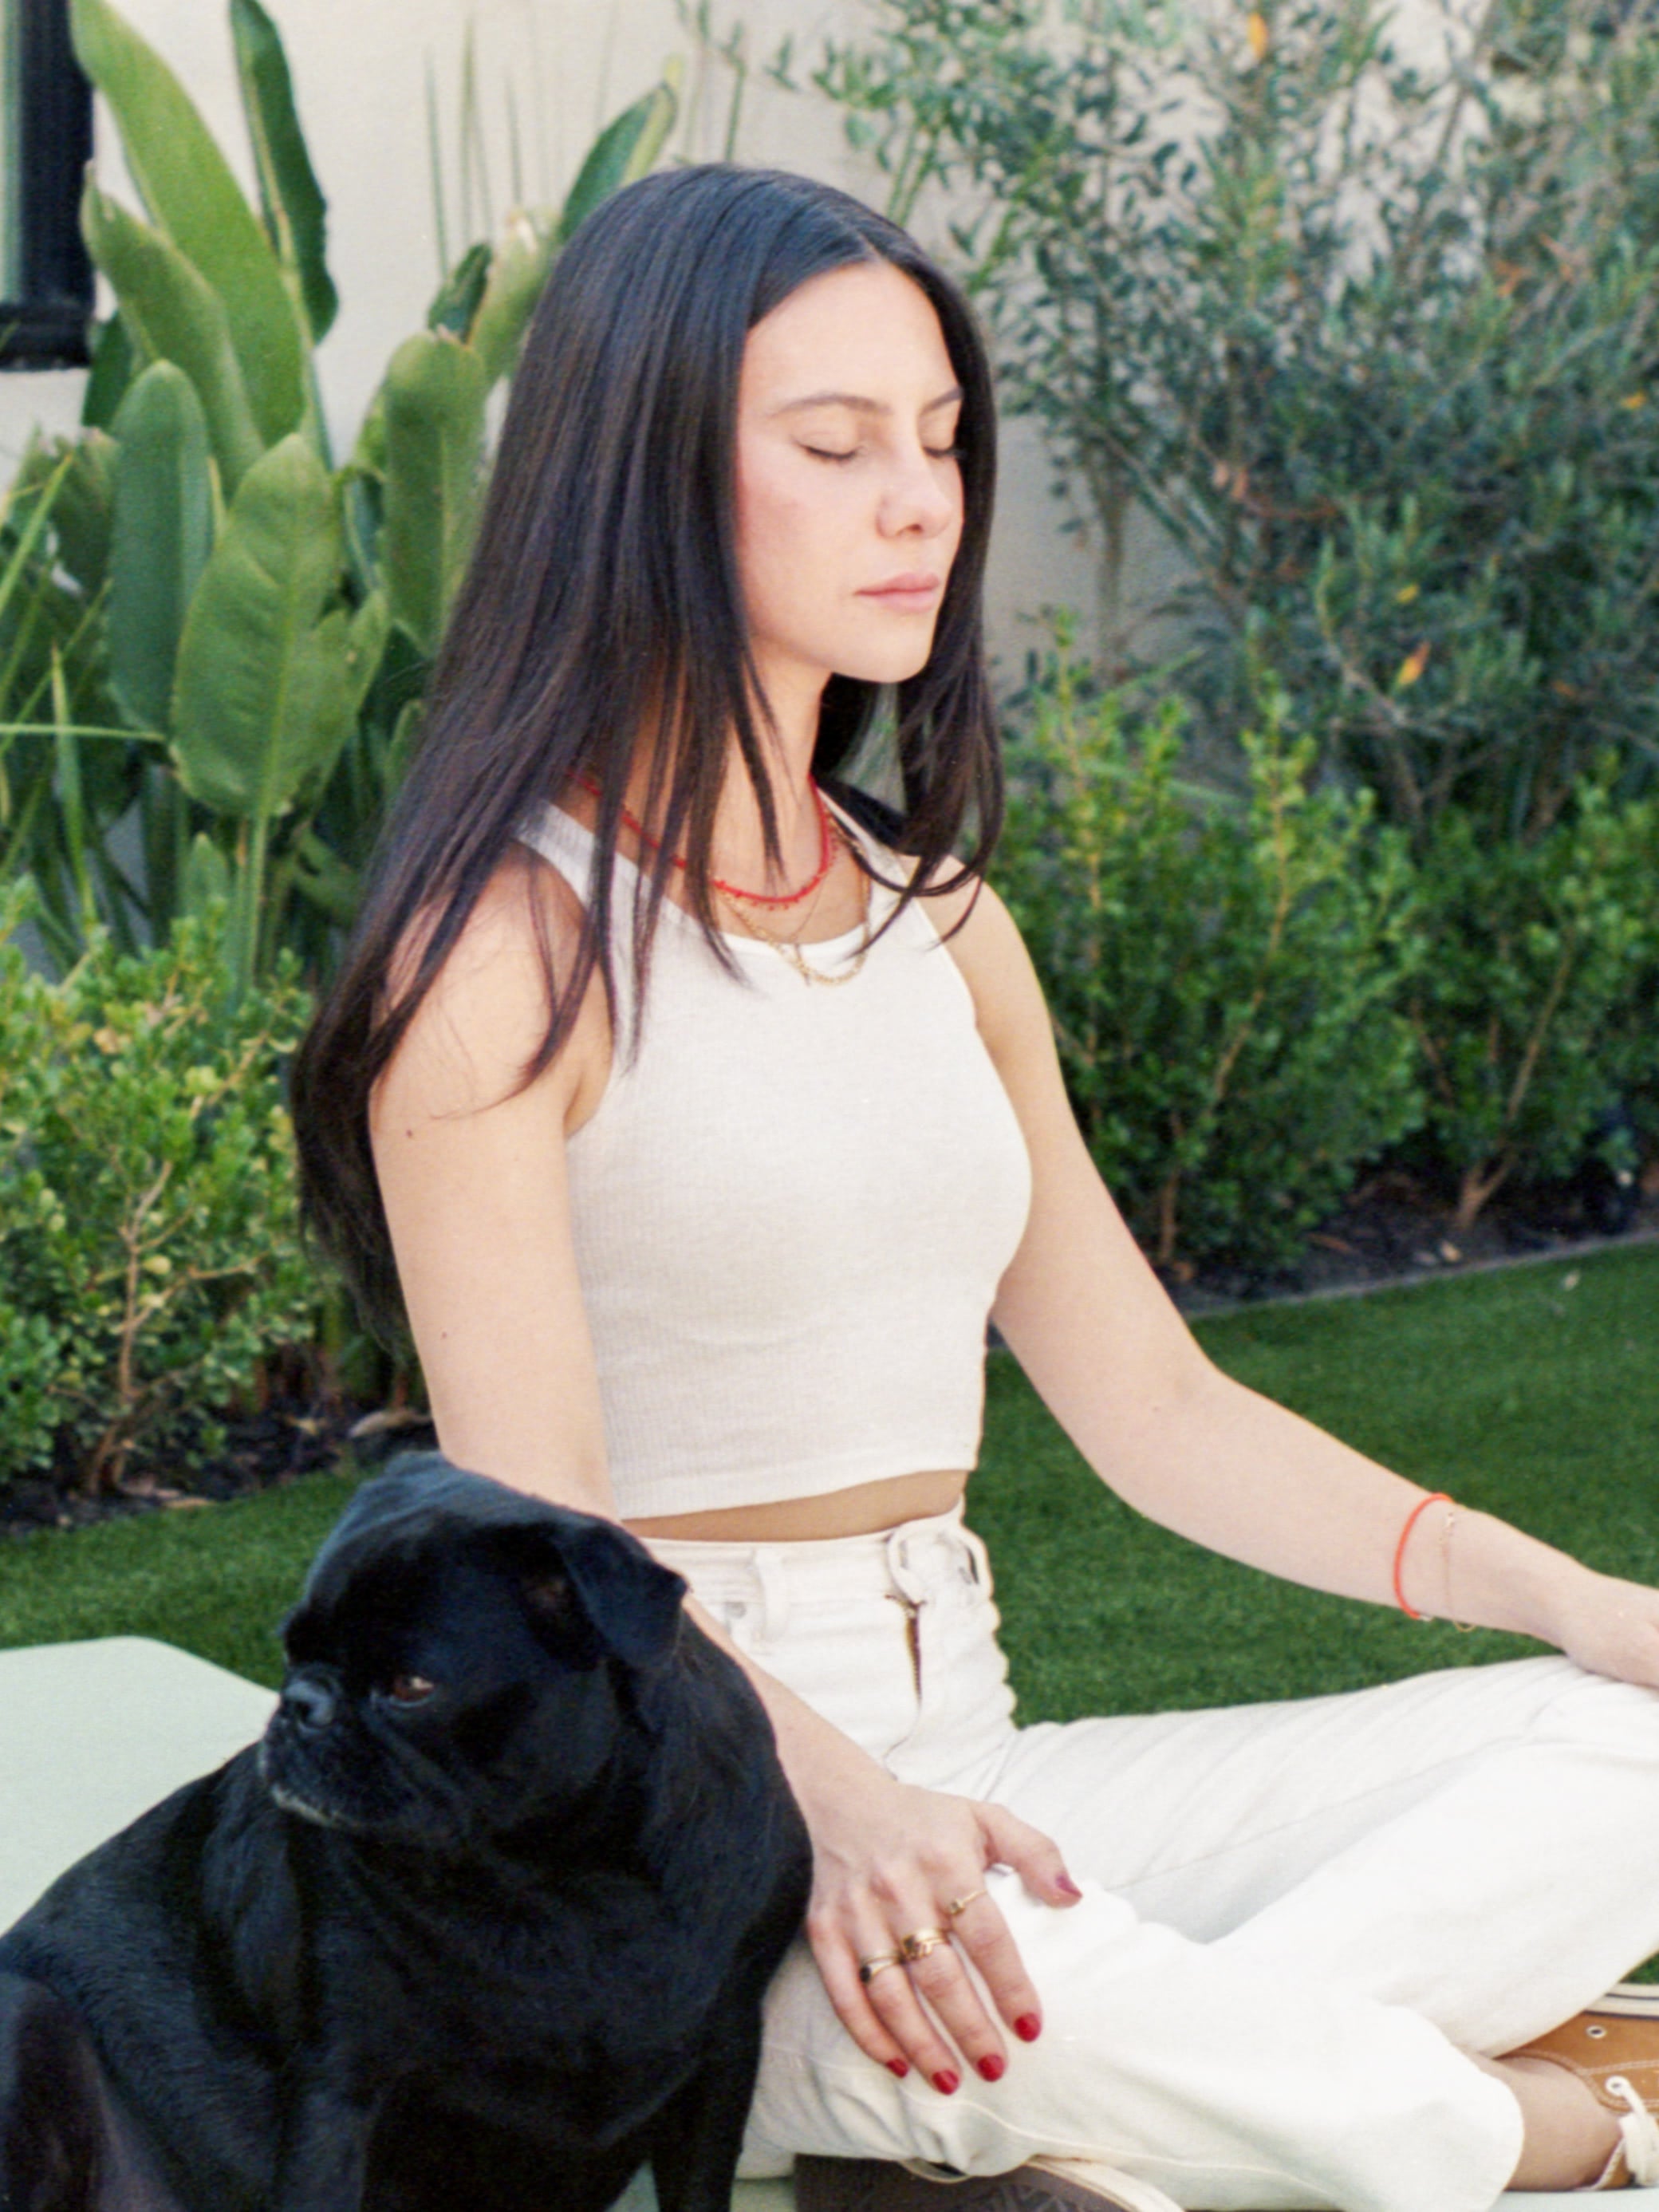 Jade Iovine meditating in the grass with her dog next to her